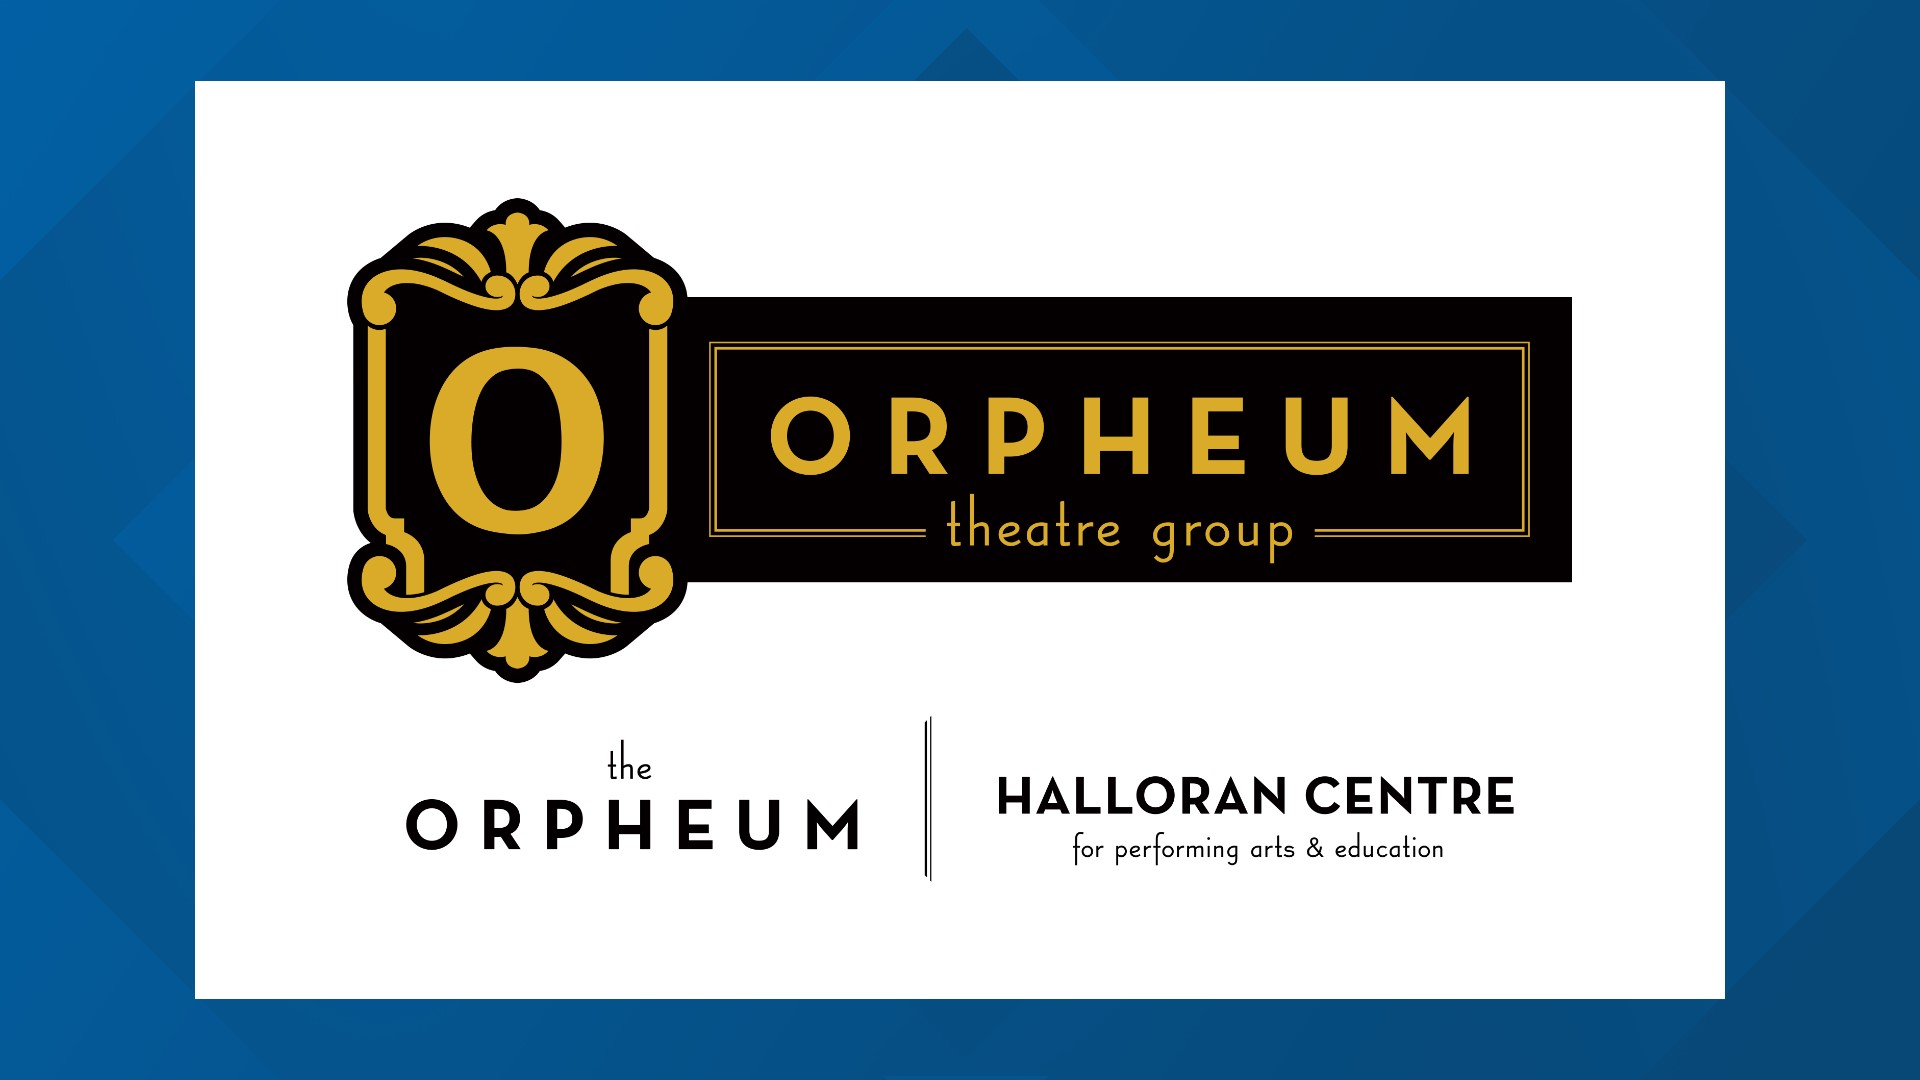 A culmination of a year-long program that brought students from all over the Mid-South together for an "intensive week of team building" took place at the Orpheum.